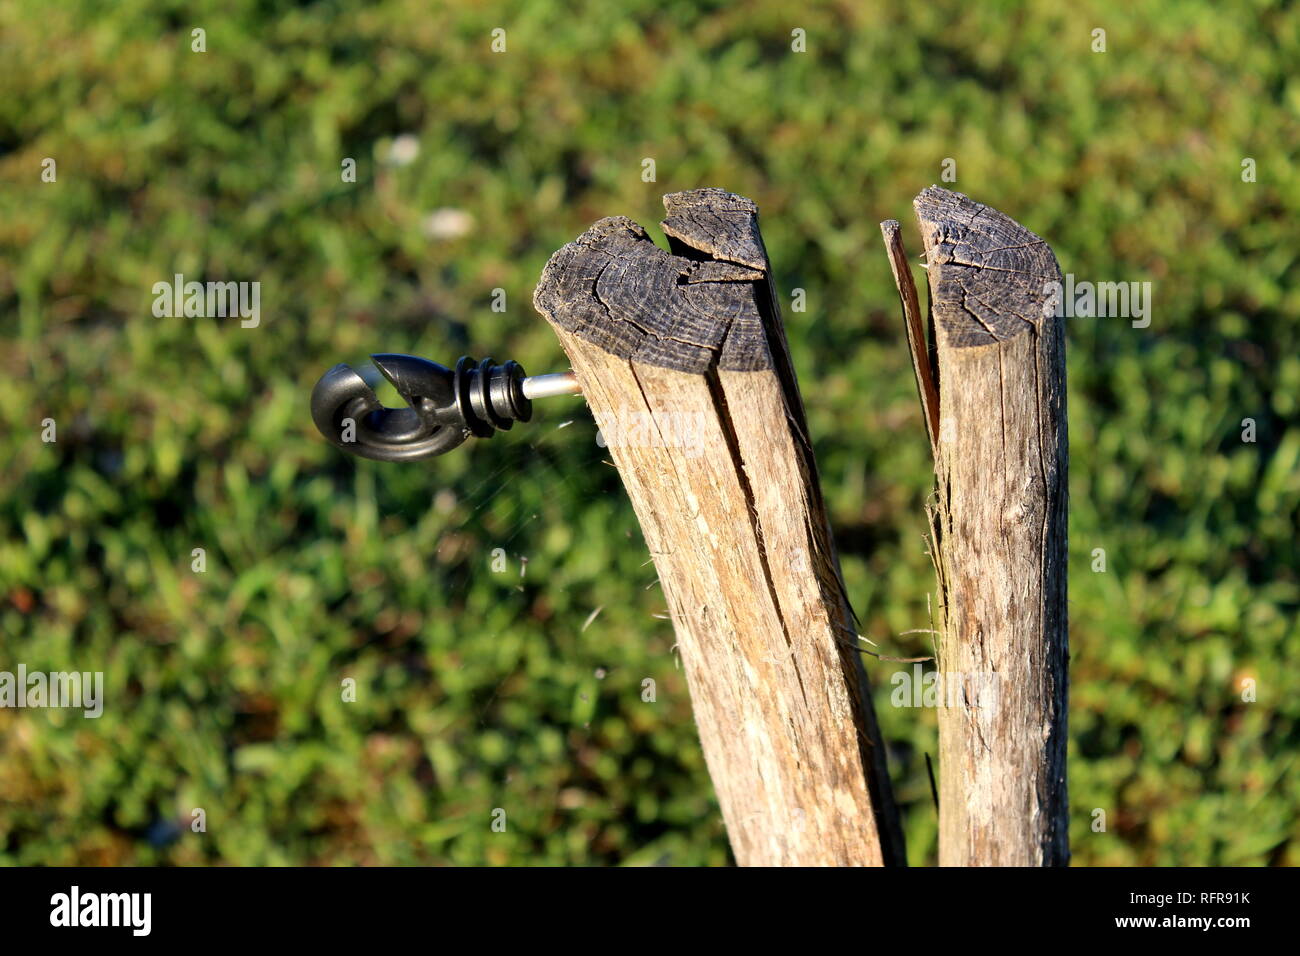 Cracked tree stump with mounted plastic holder for electrical metal wire used for farm animals protection with cobweb and grass in background Stock Photo